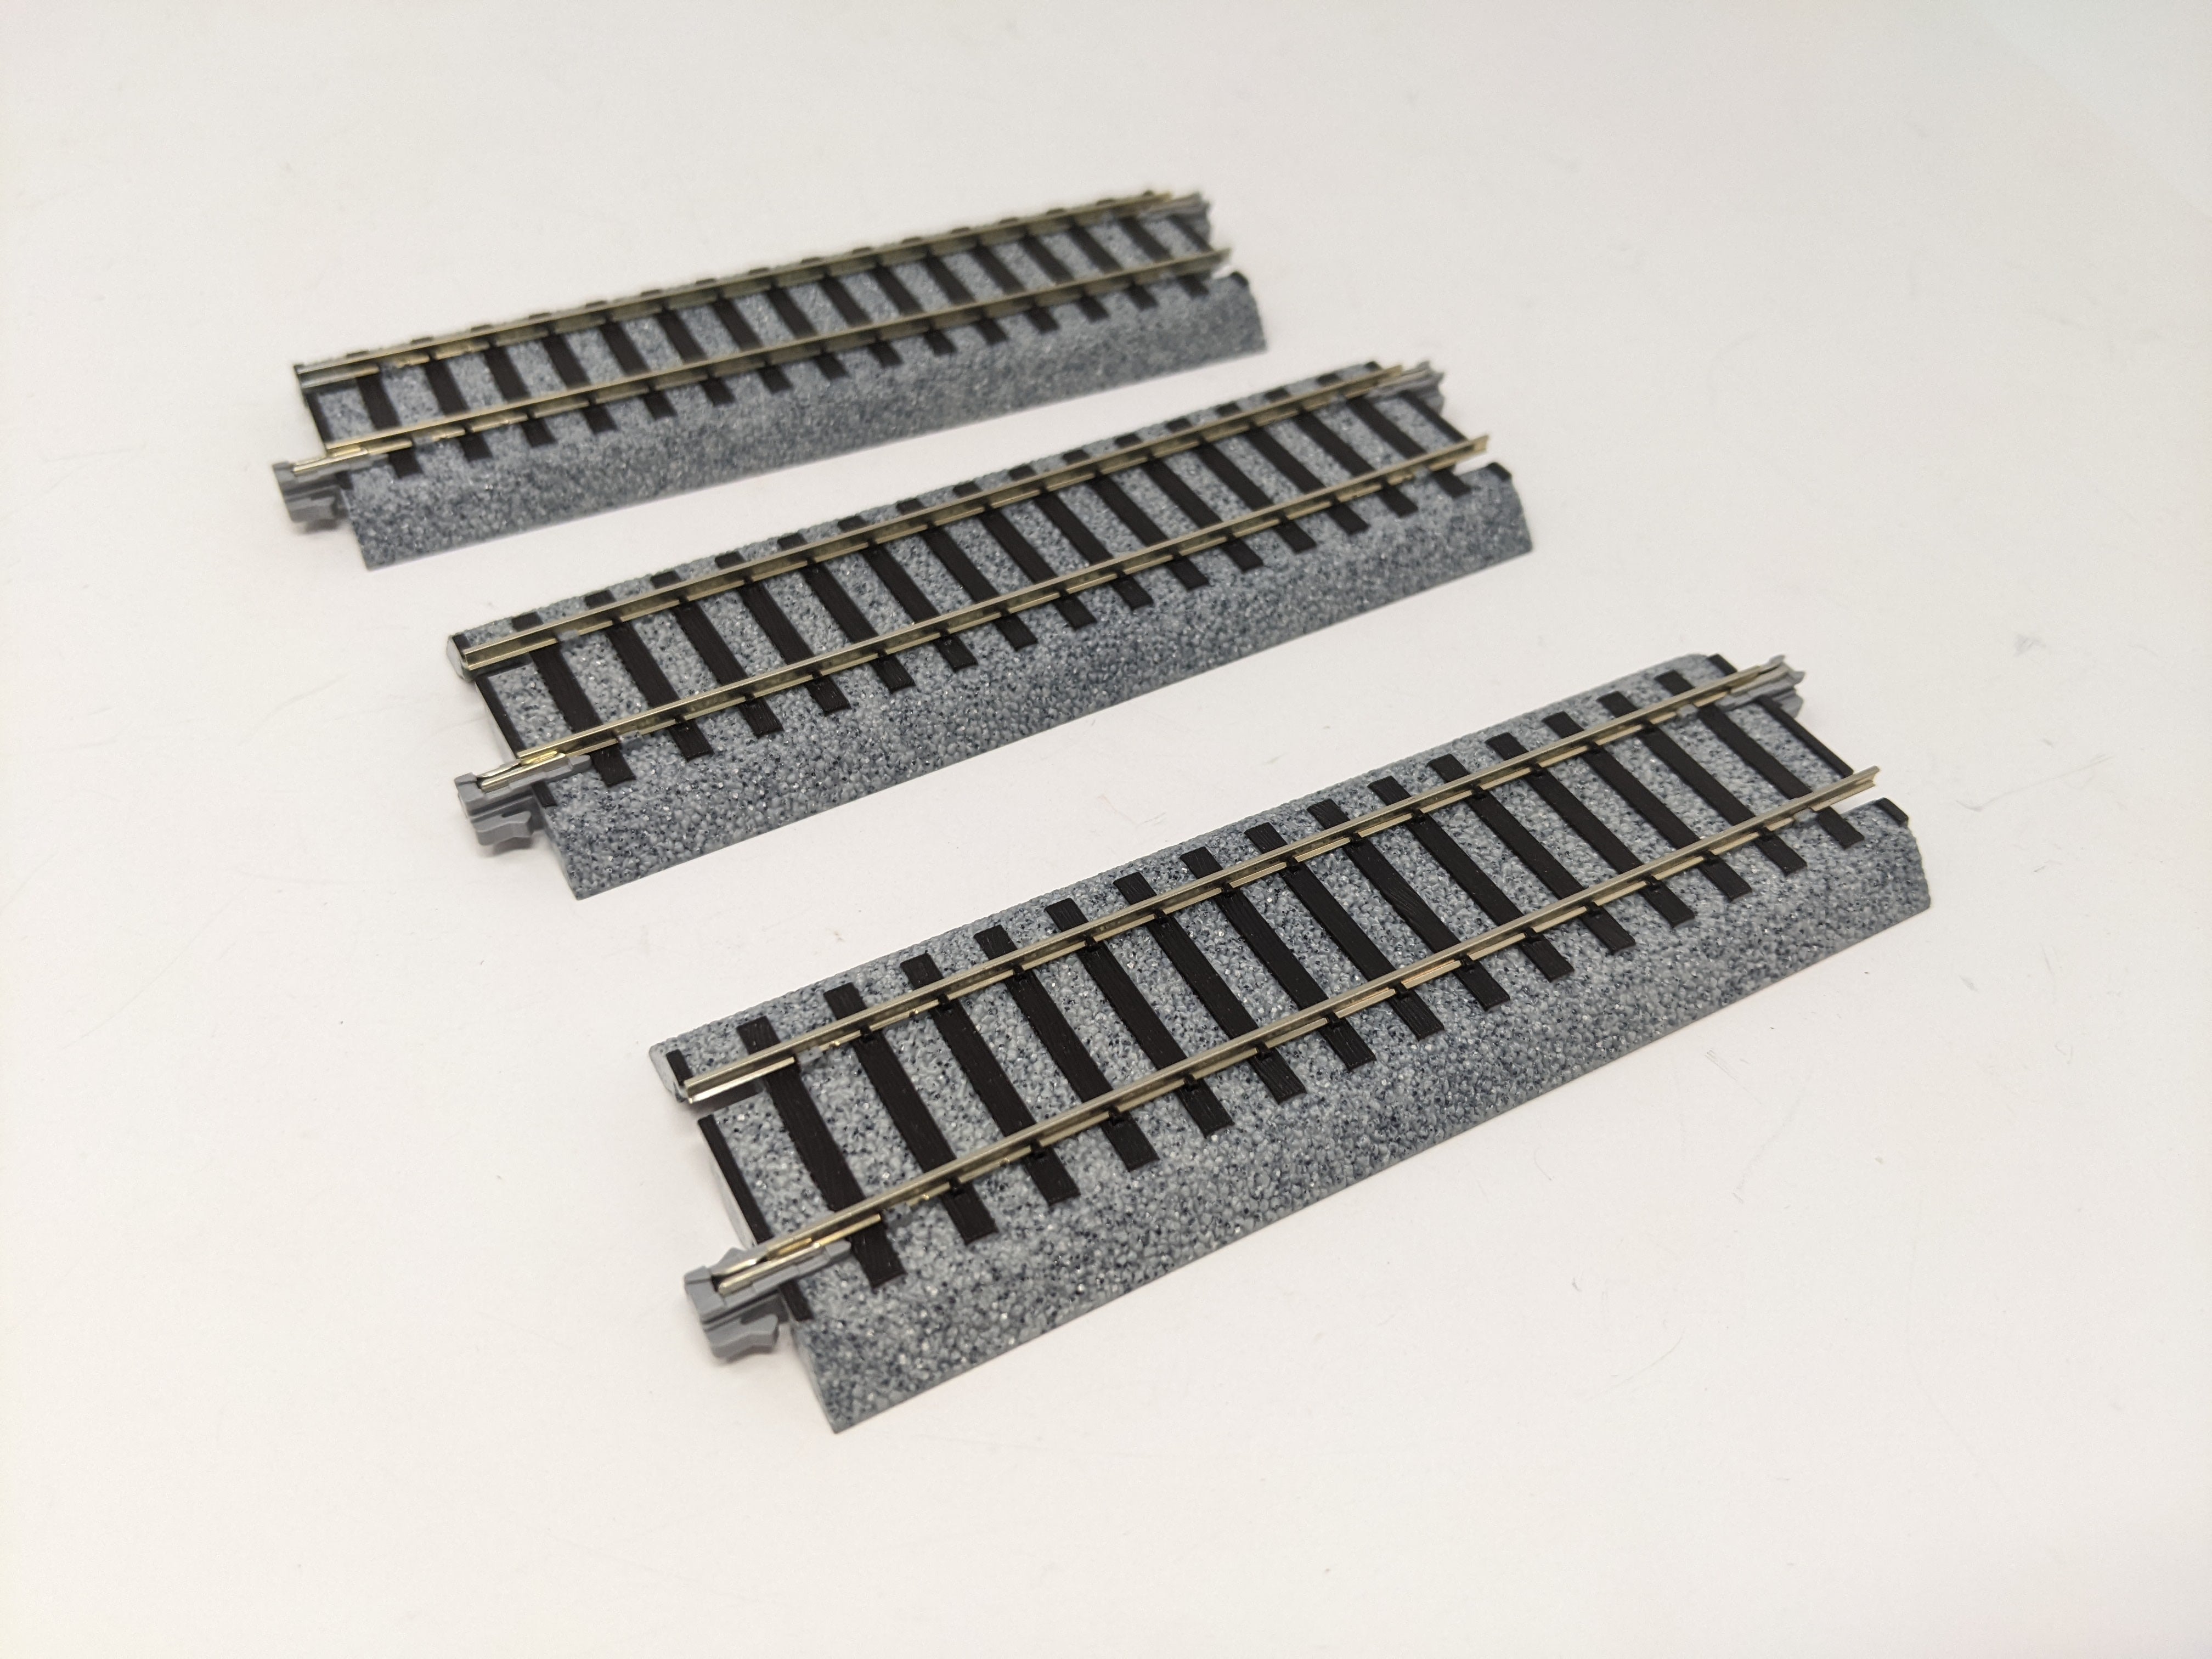 USED KATO HO Scale, Lot of 3 pieces of Straight UniTrack 123mm